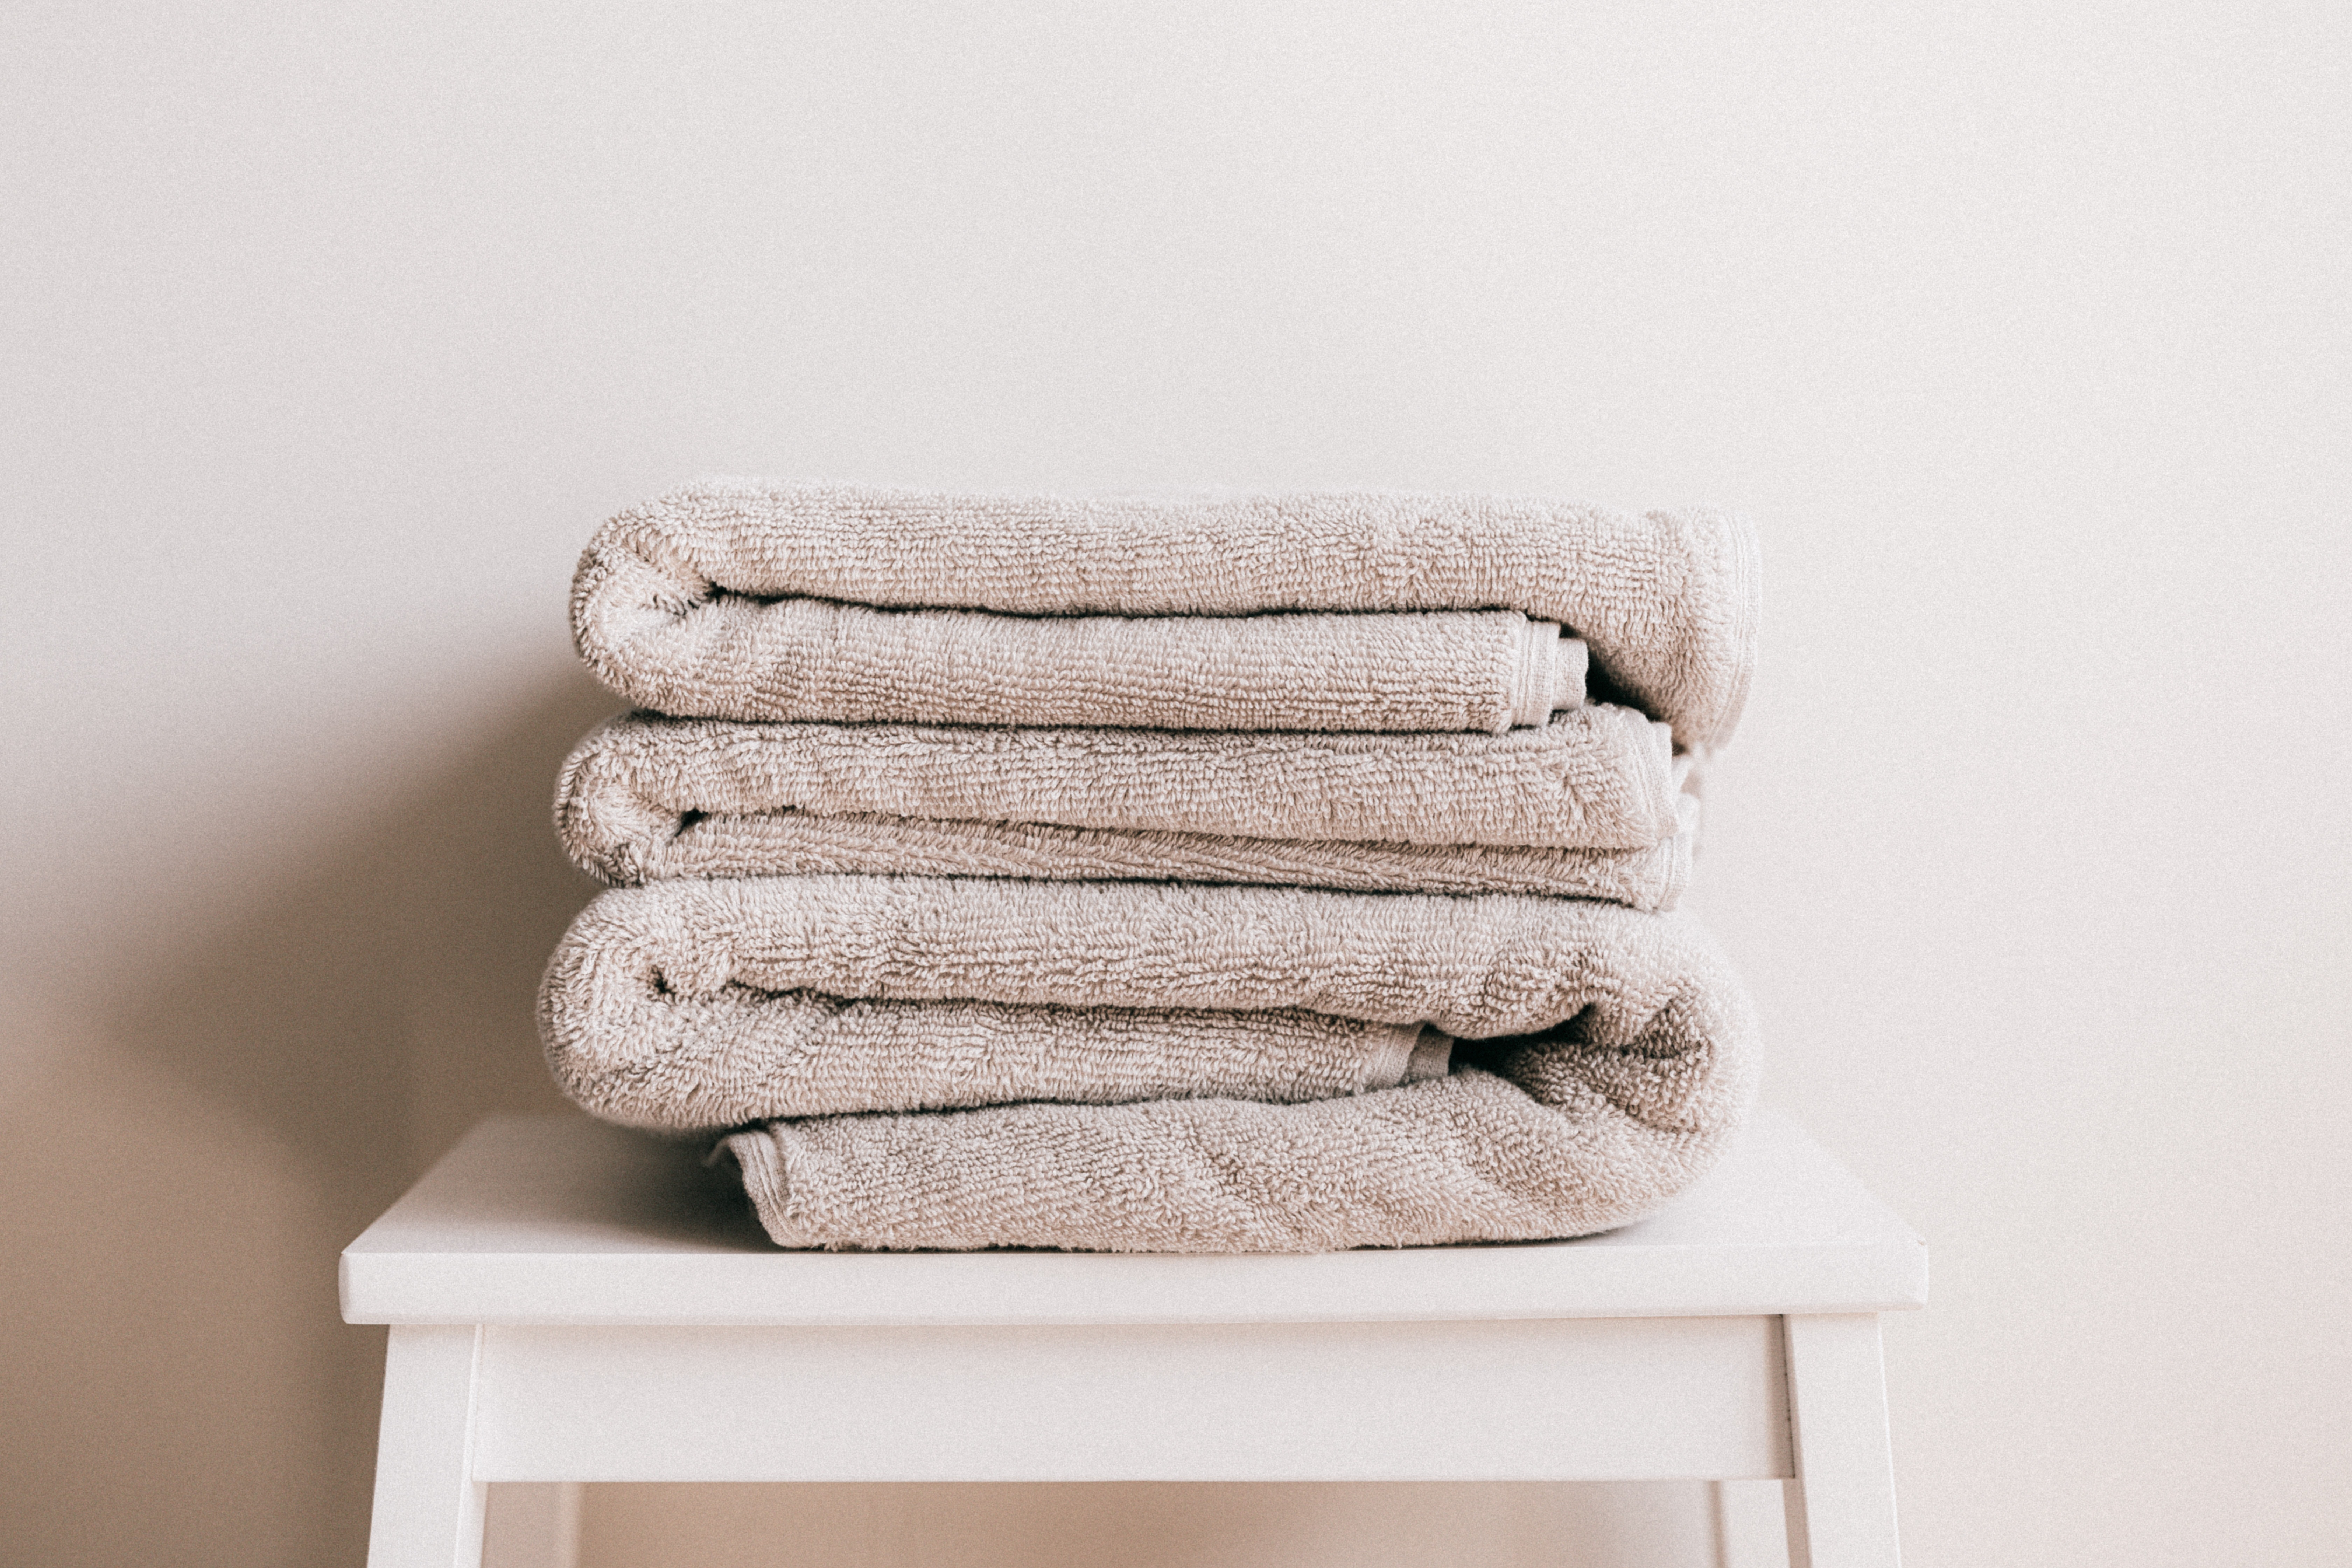 Stack of towels on a table